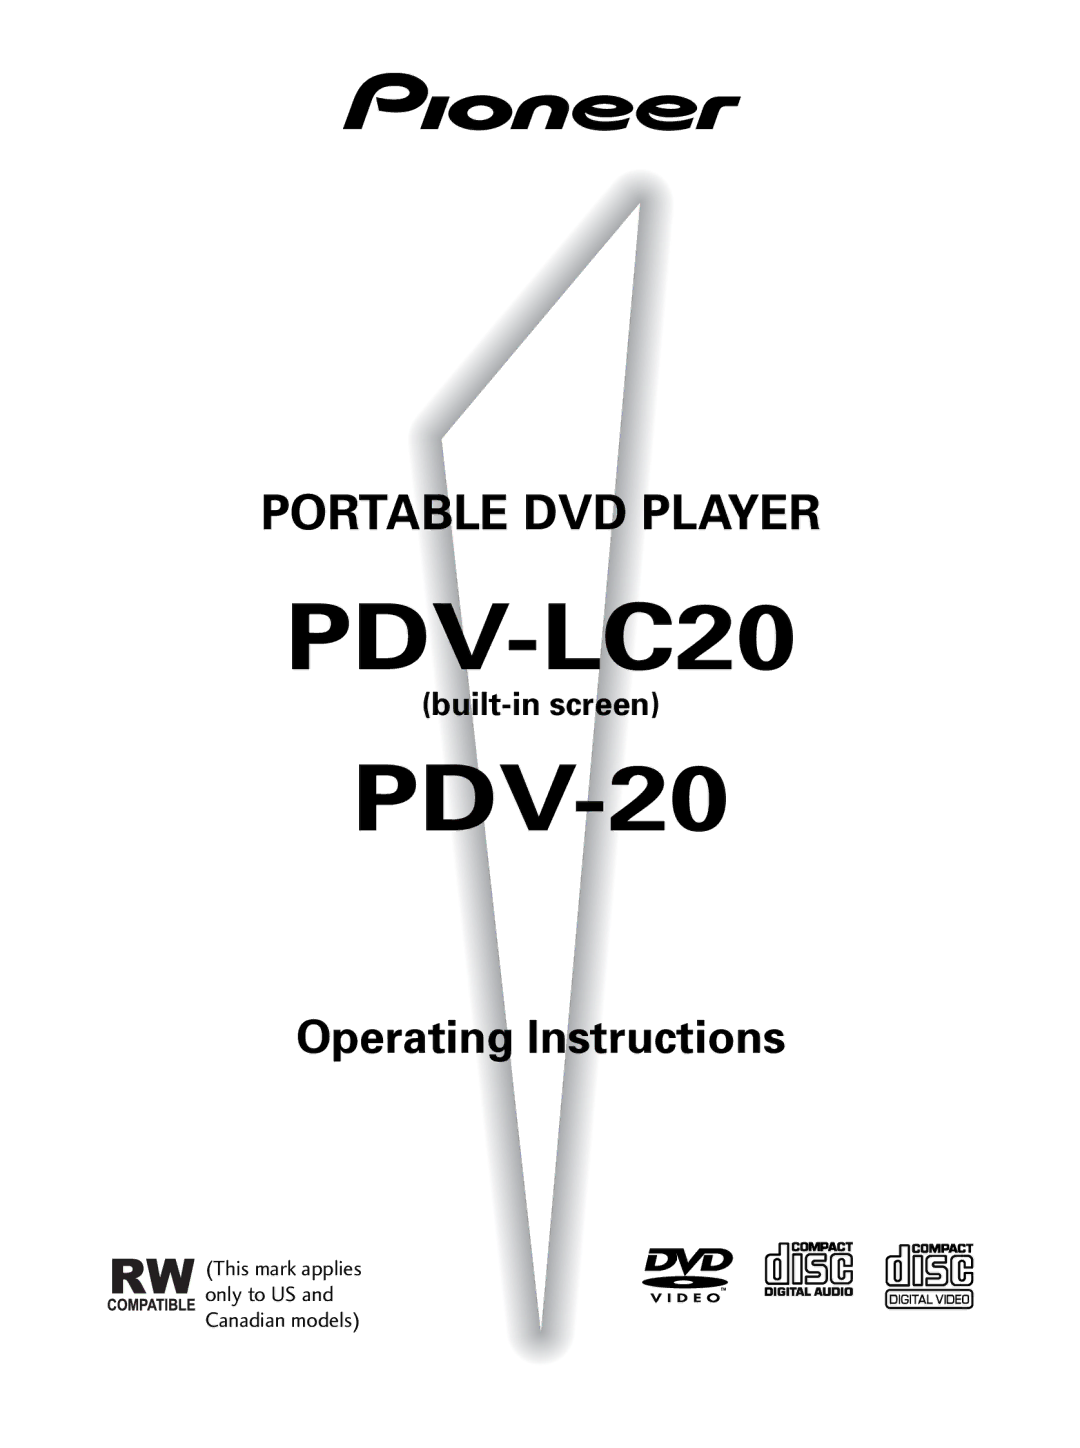 Pioneer PDV-LC20, PDV-20 operating instructions Built-in screen 